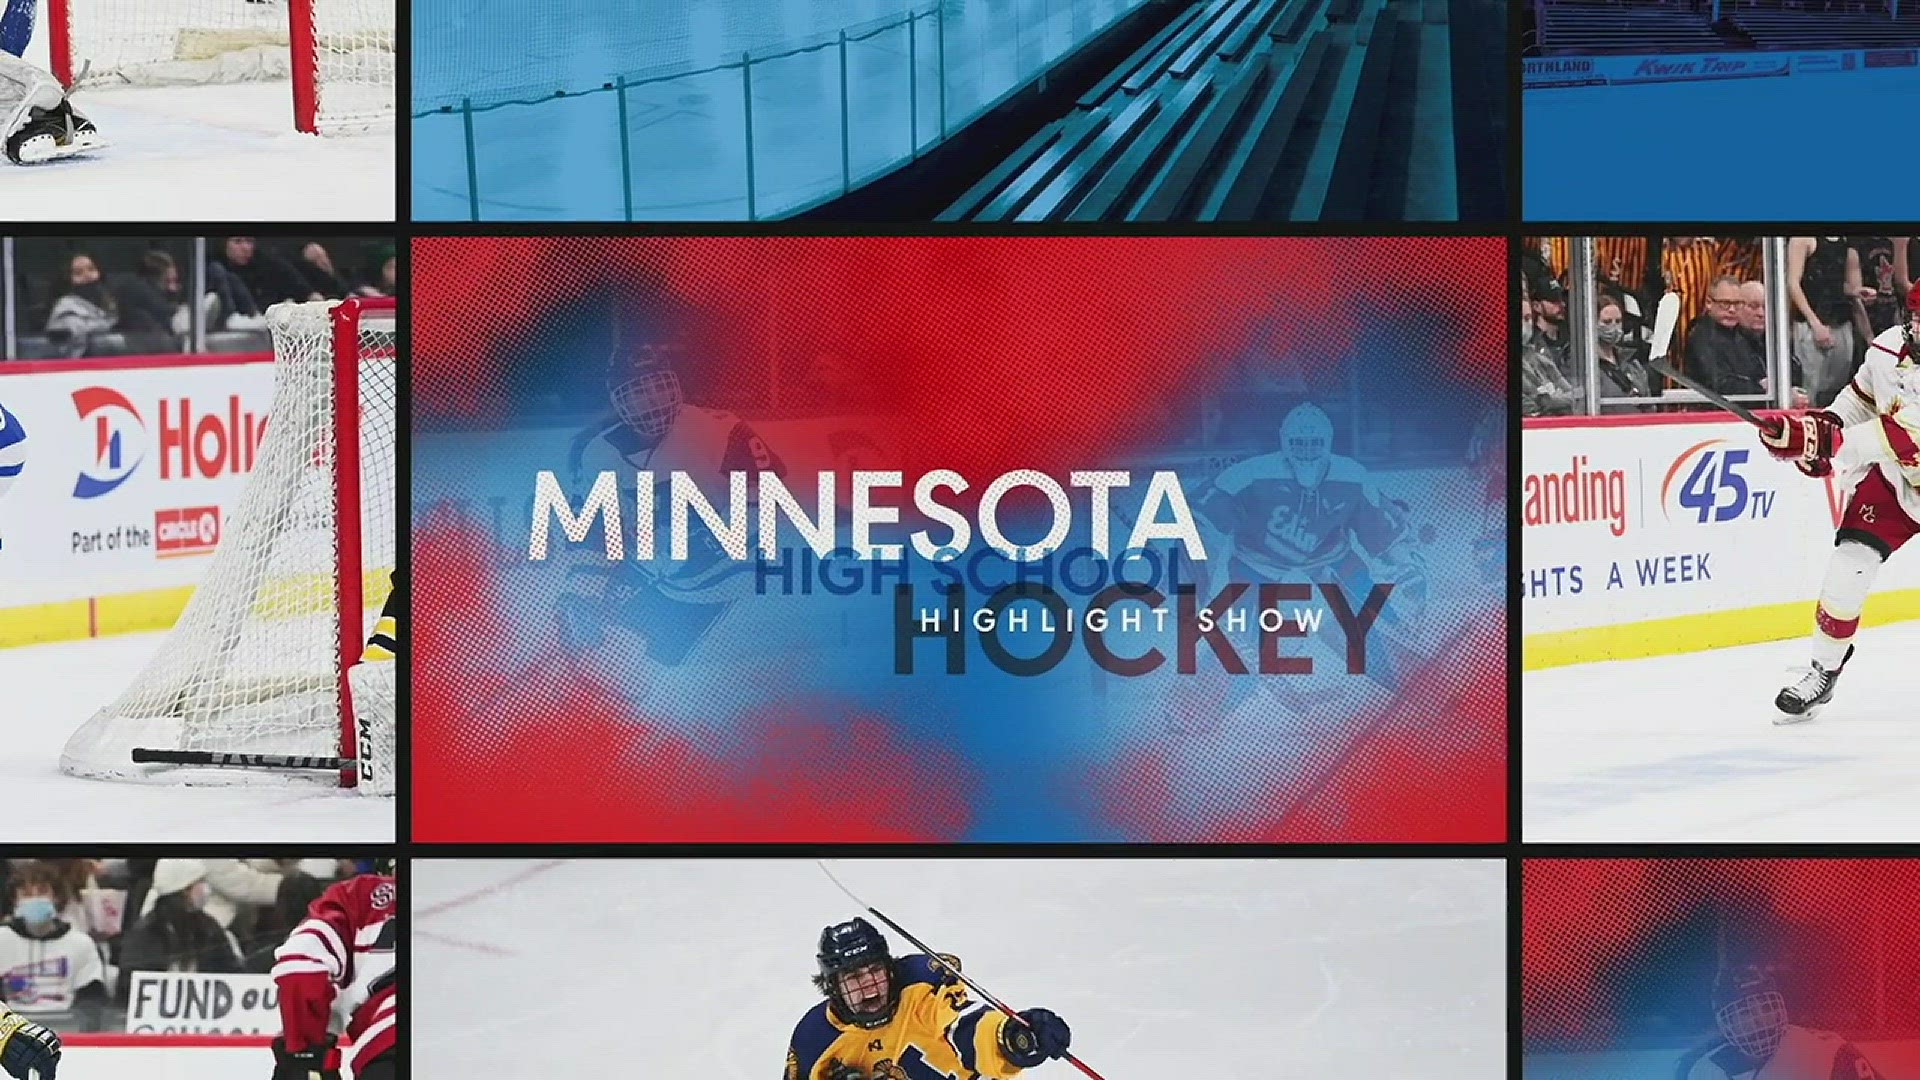 Catch up on the latest news around high school hockey in Minnesota with Inside the Bubble!